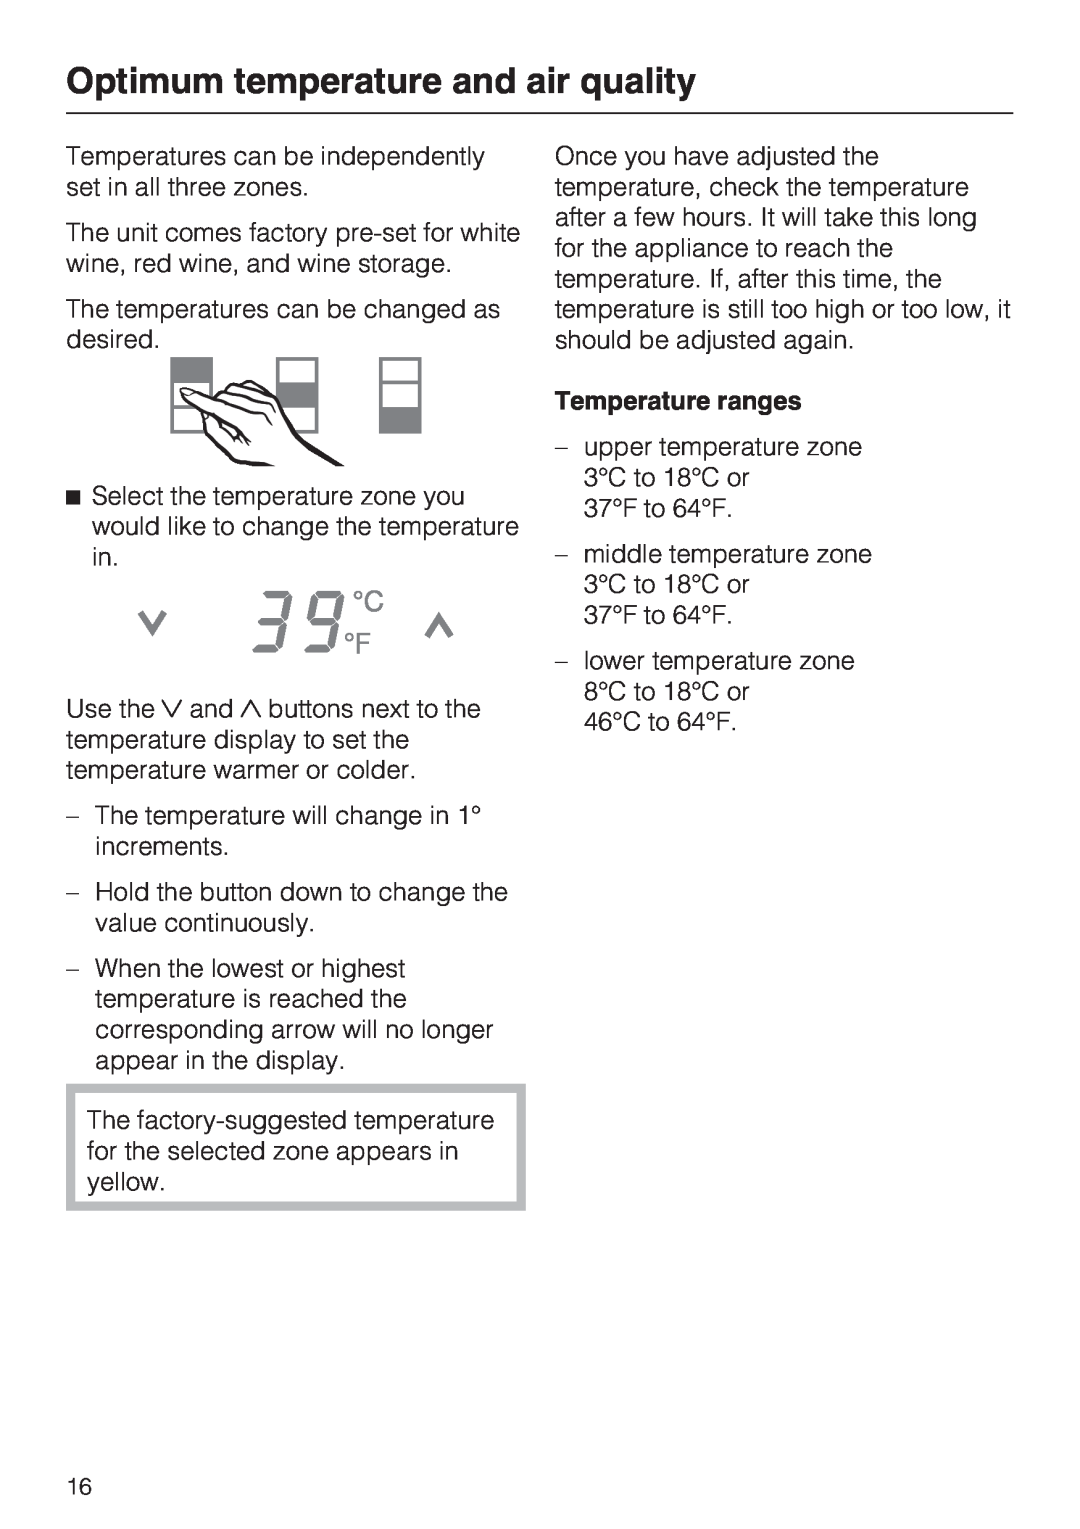 Miele KWT 1601 SF, KWT 1611 SF installation instructions Temperature ranges, Optimum temperature and air quality 